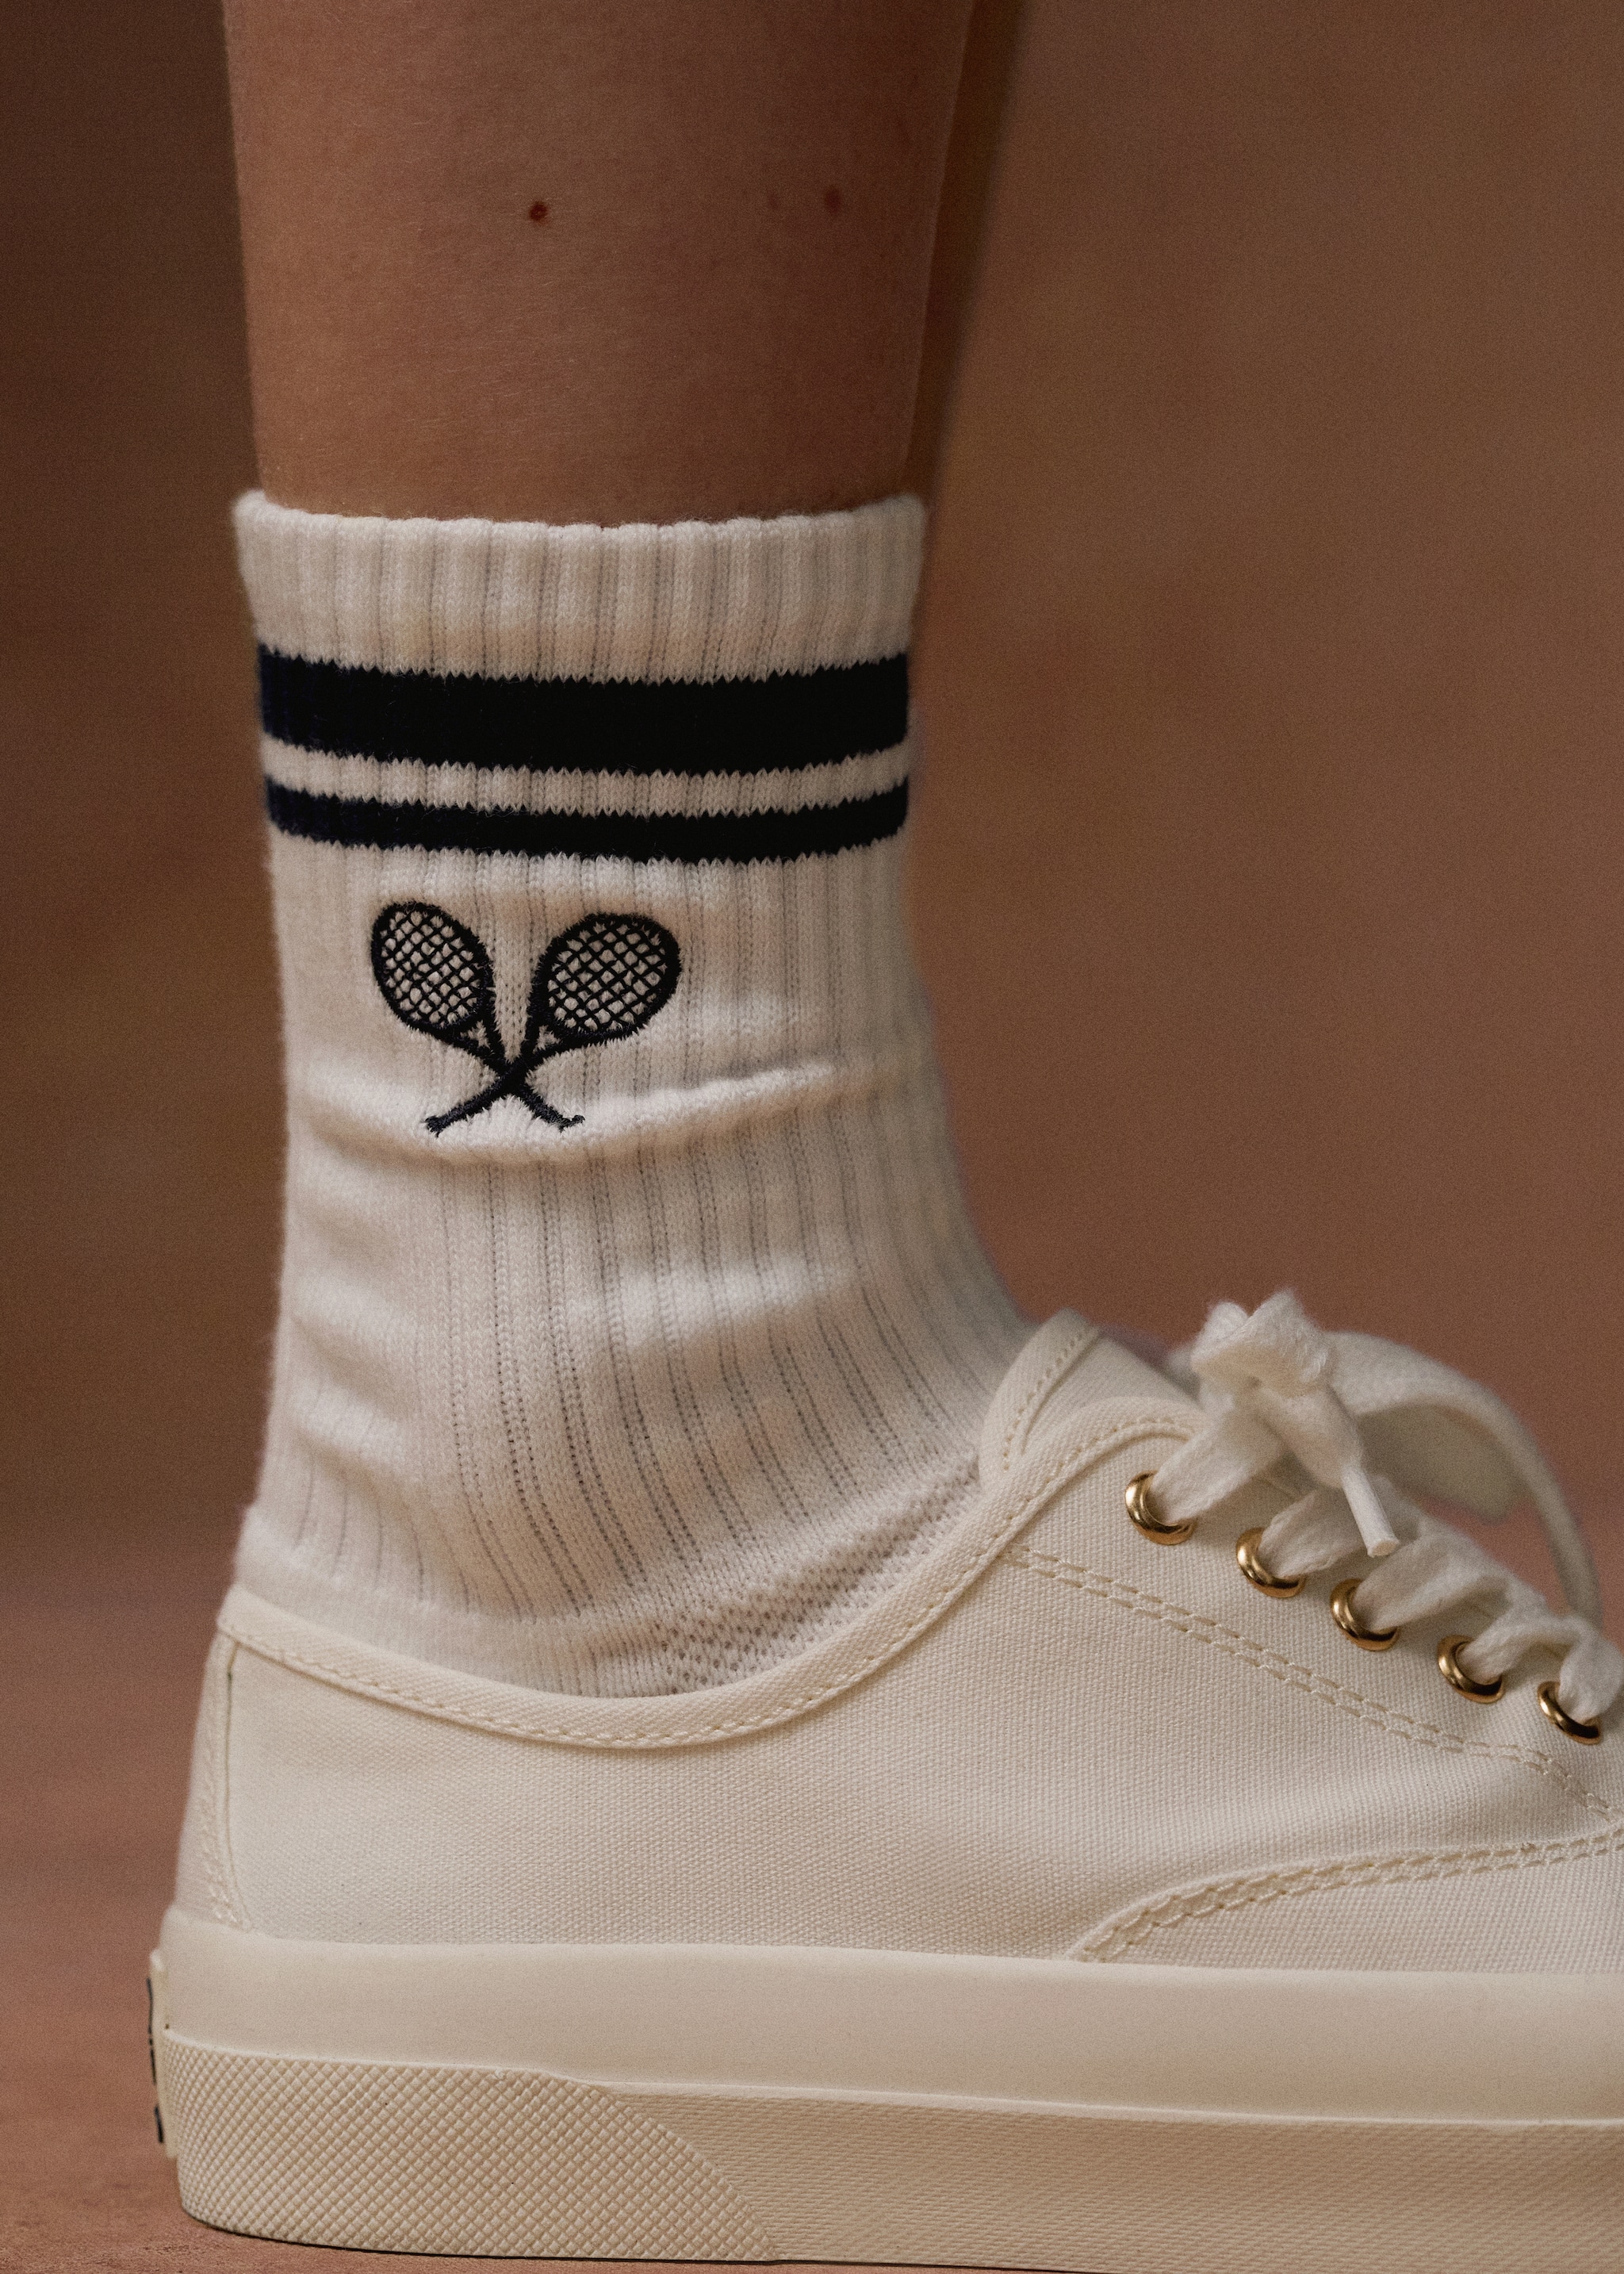 Cotton socks with embroidered detail - General plane